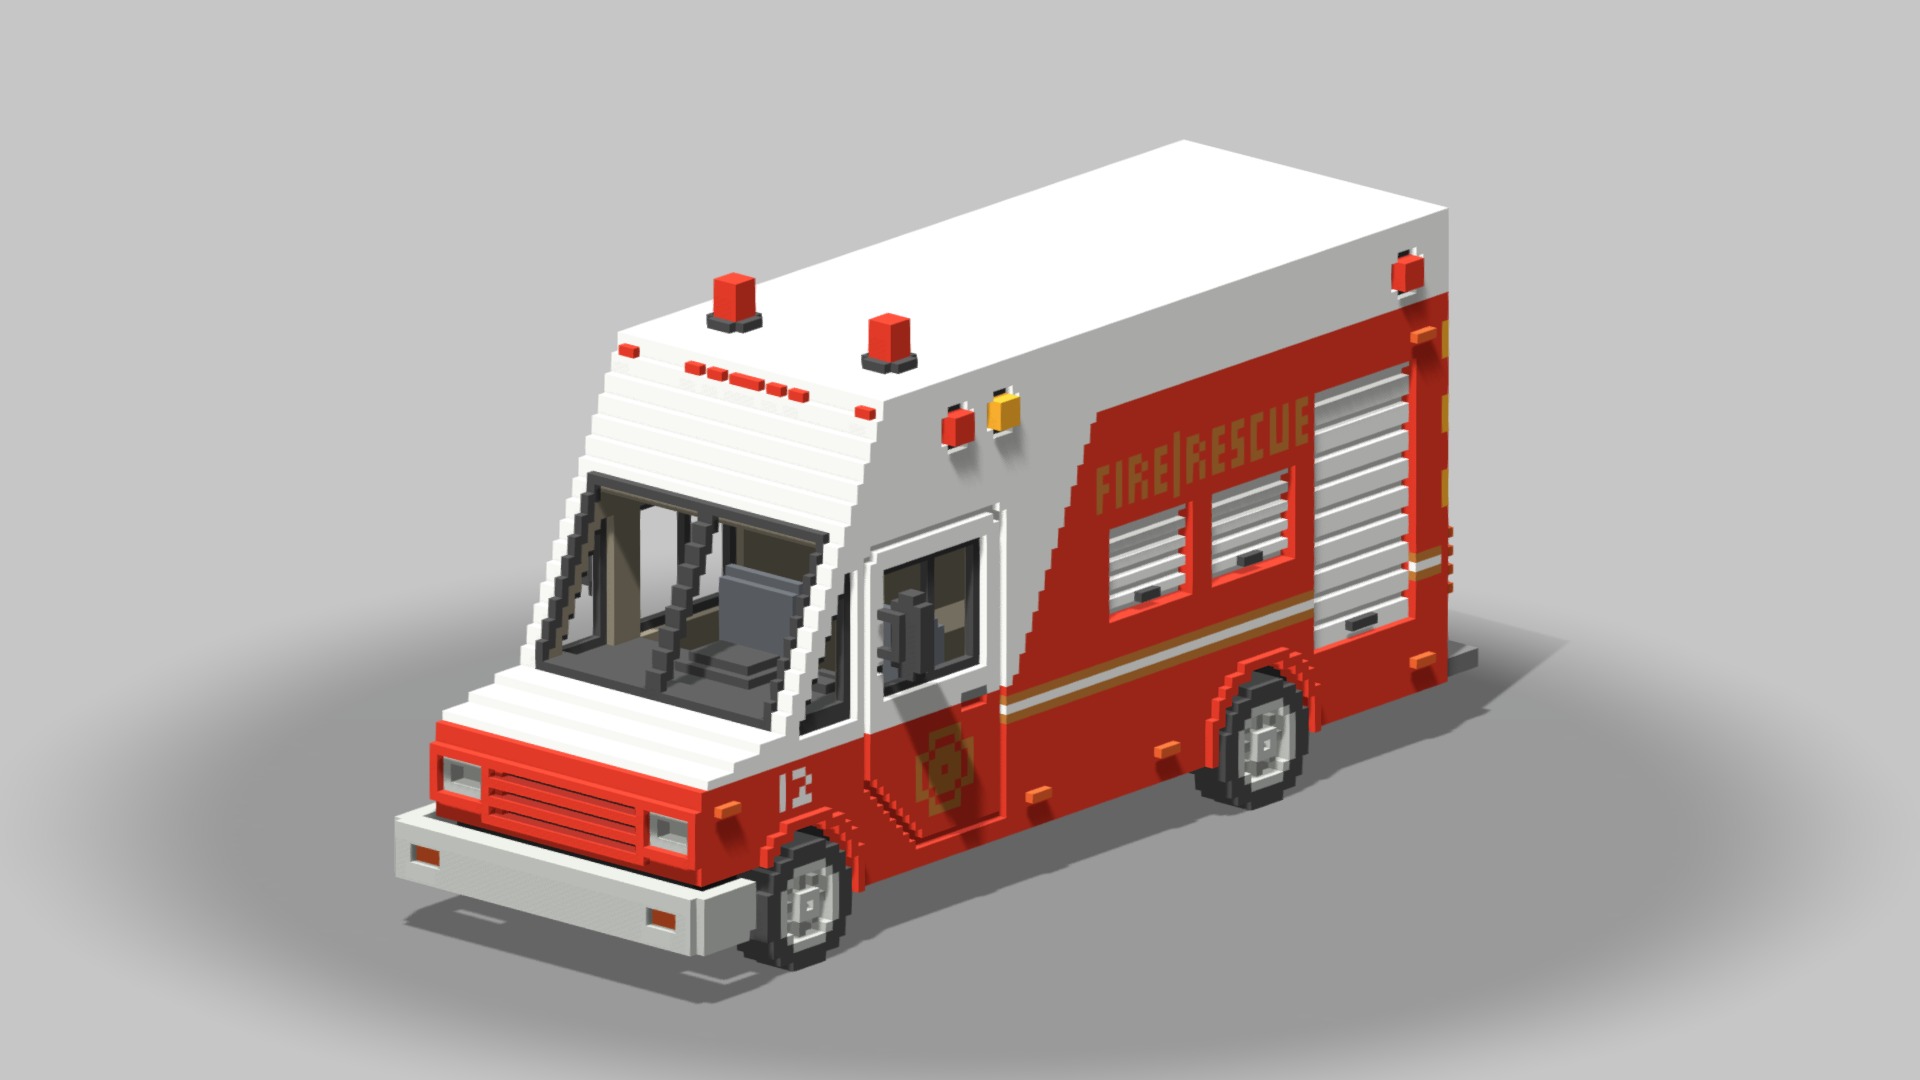 3D model Voxel Fire Rescue Van - This is a 3D model of the Voxel Fire Rescue Van. The 3D model is about a red and white fire truck.